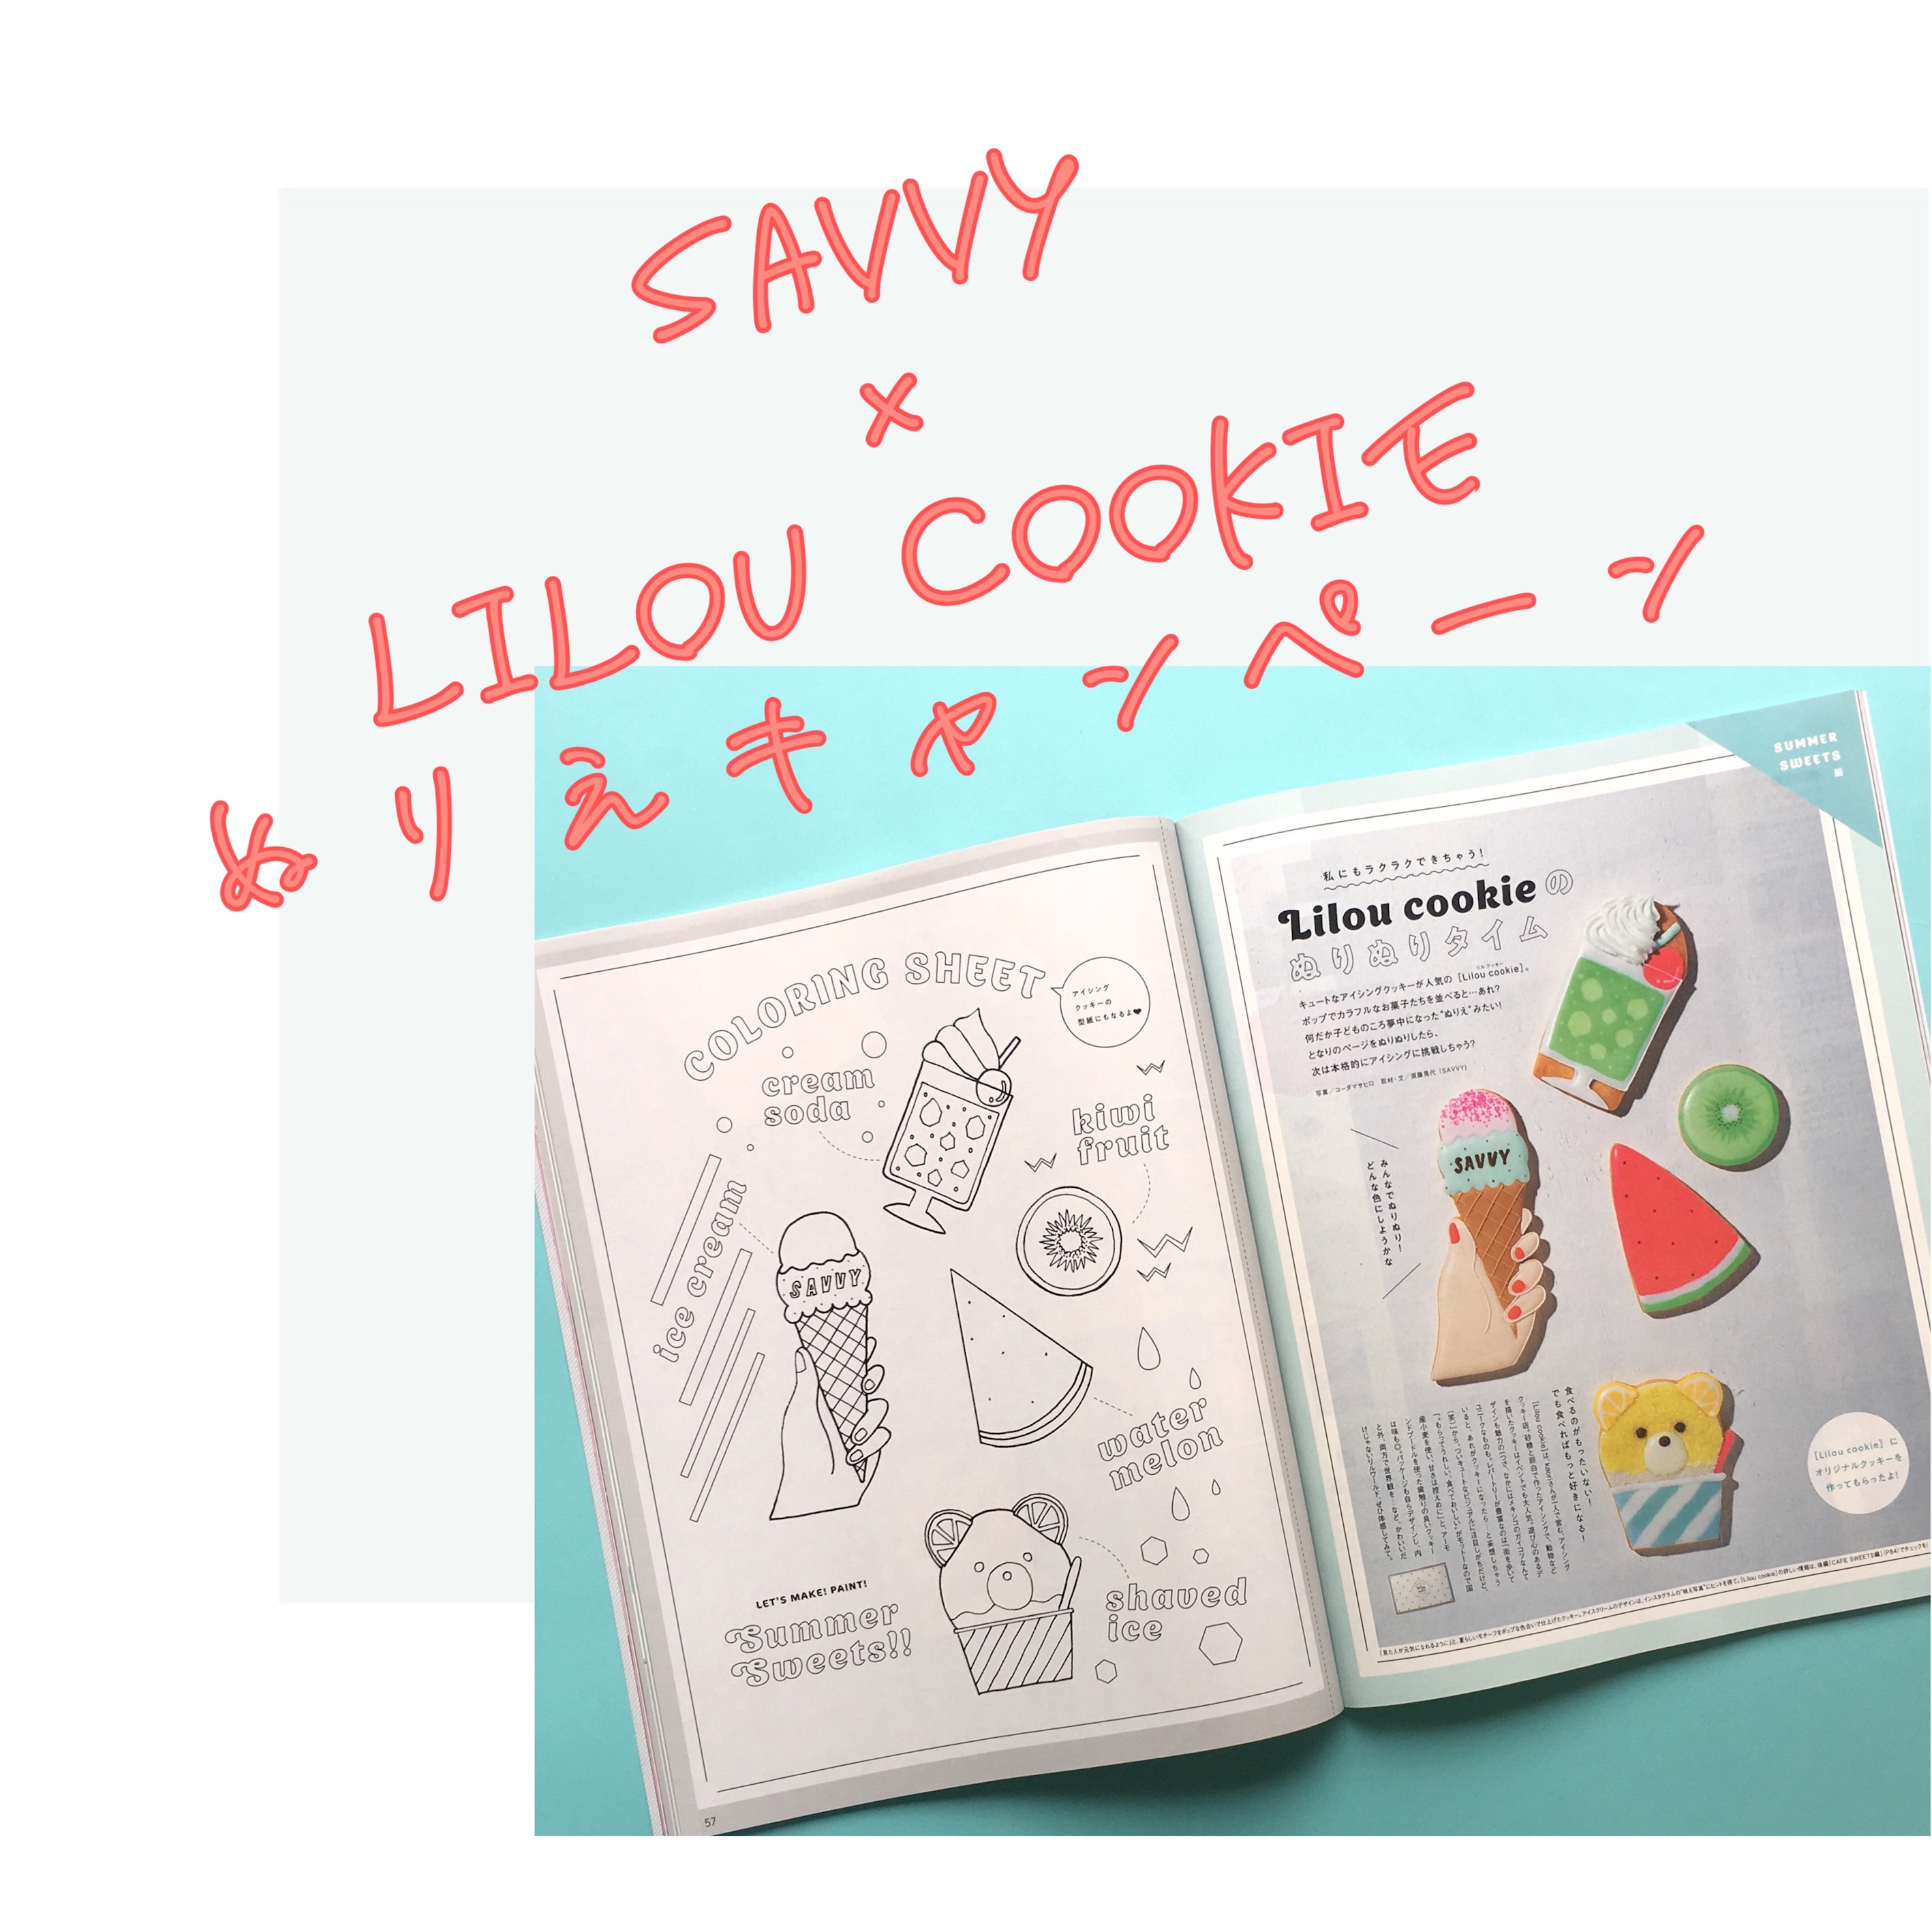 SAVVY × Lilou  cookie ぬりえキャンペーン　当選発表